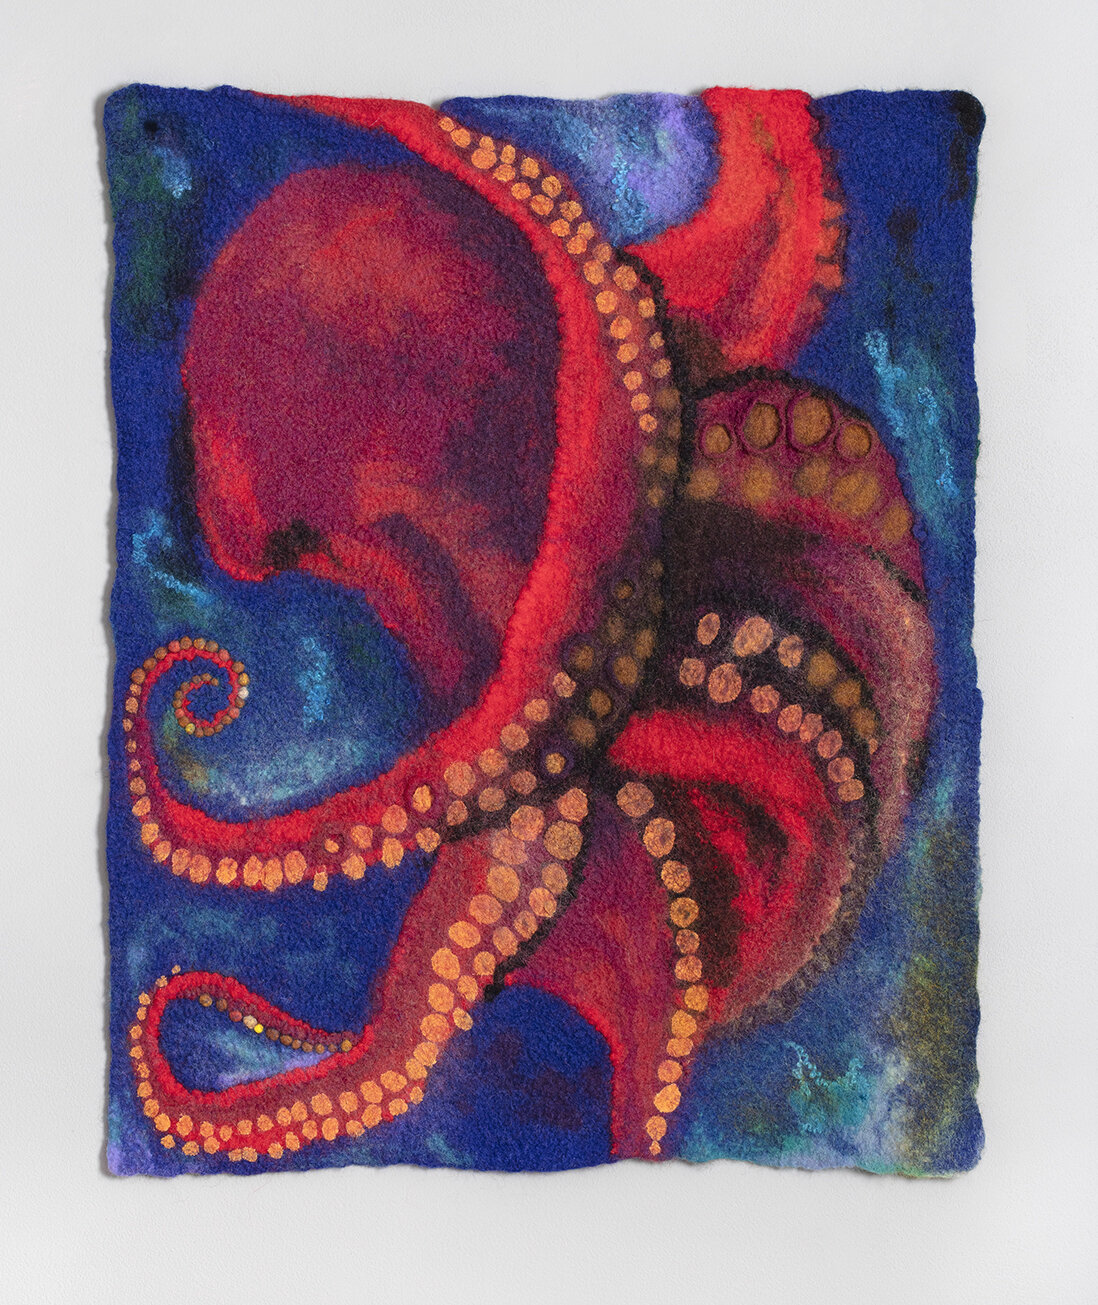 Red Octopus